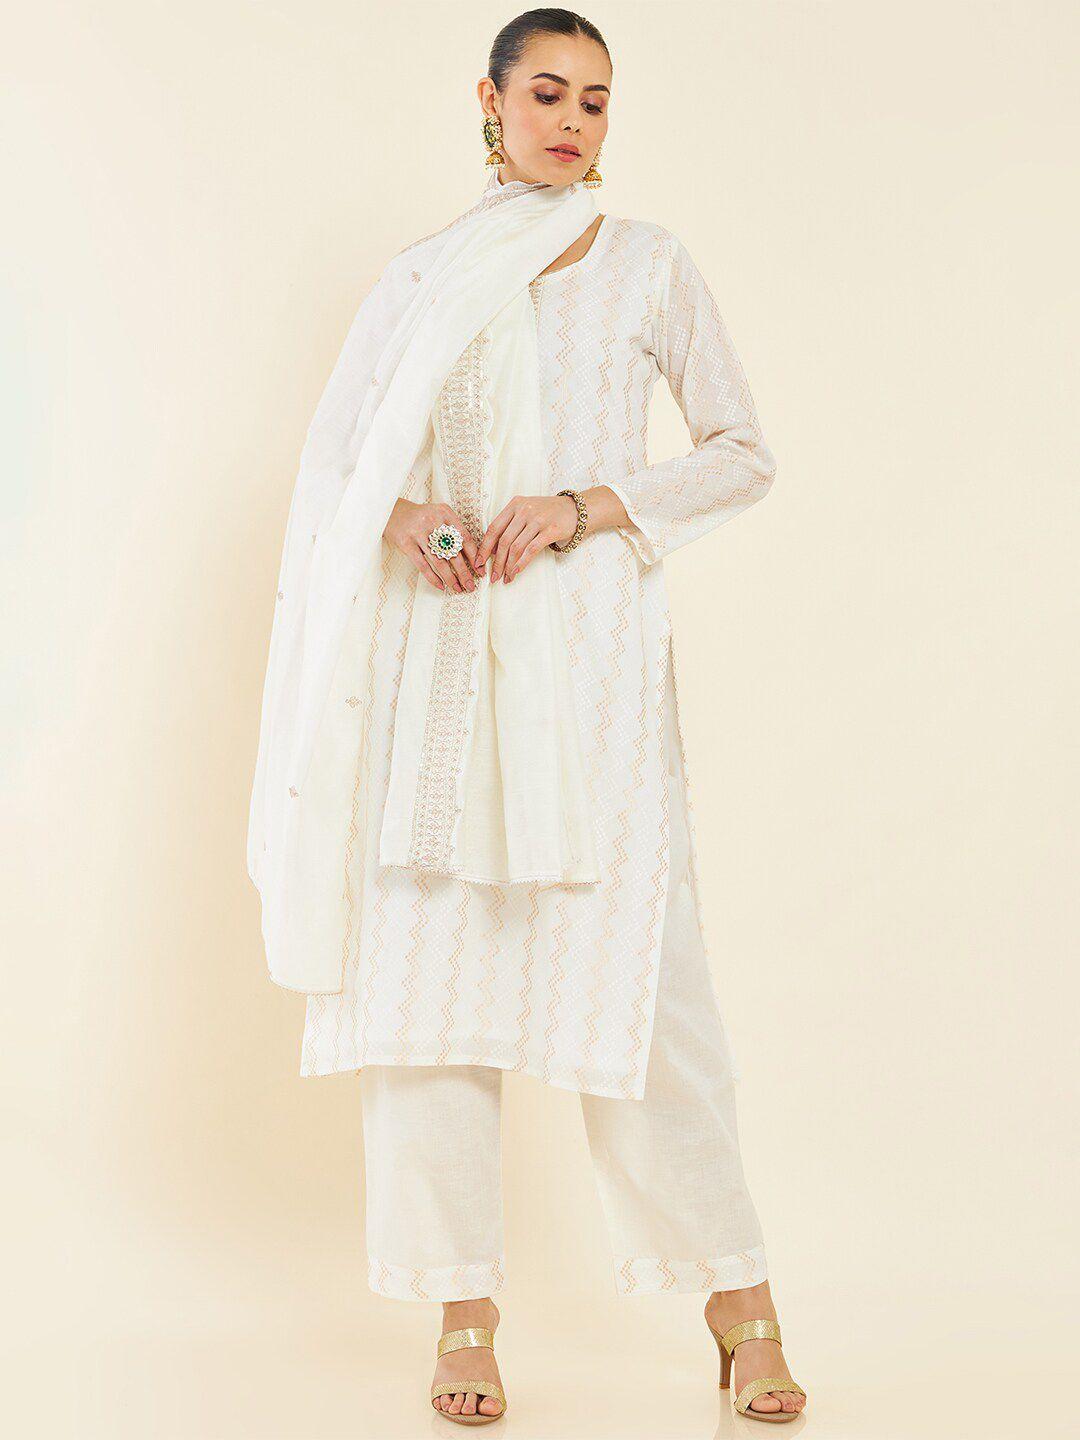 soch-off-white-pure-cotton-unstitched-dress-material